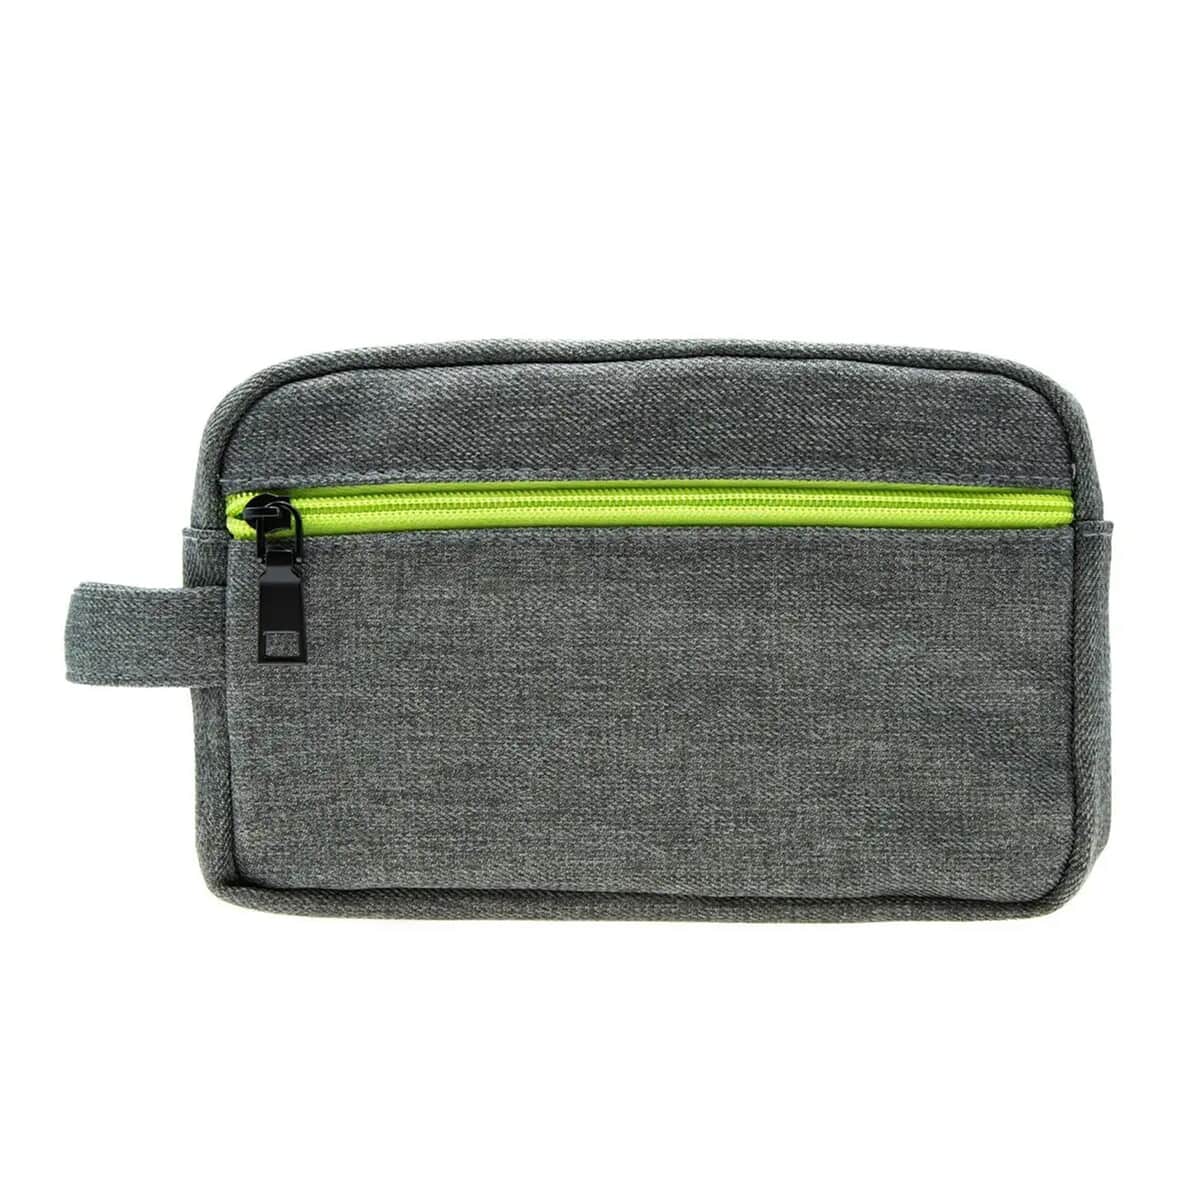 Gray Canvas Textured Dopp Kit With Lime Green Zipper, Men's Dopp Kit Bag, Best Dopp Kit, Travel Organizer for Accessories and Toiletries, Men's Toiletry Bag image number 0